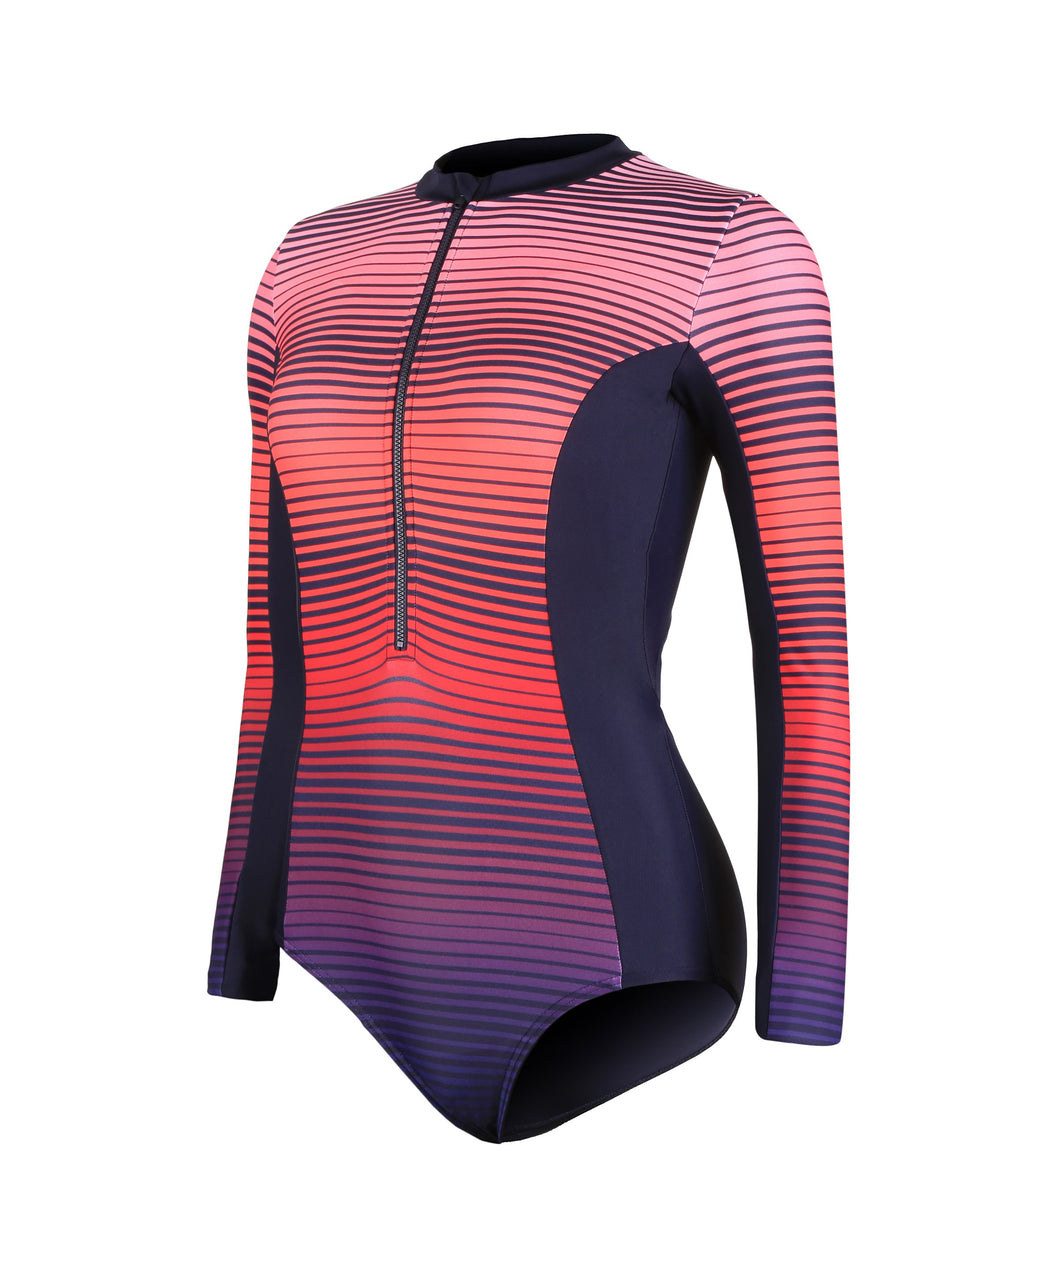 SPEEDO ASIA FIT WOMENS PLACEMENT LONG SLEEVE WRAP BACK 1 PIECE